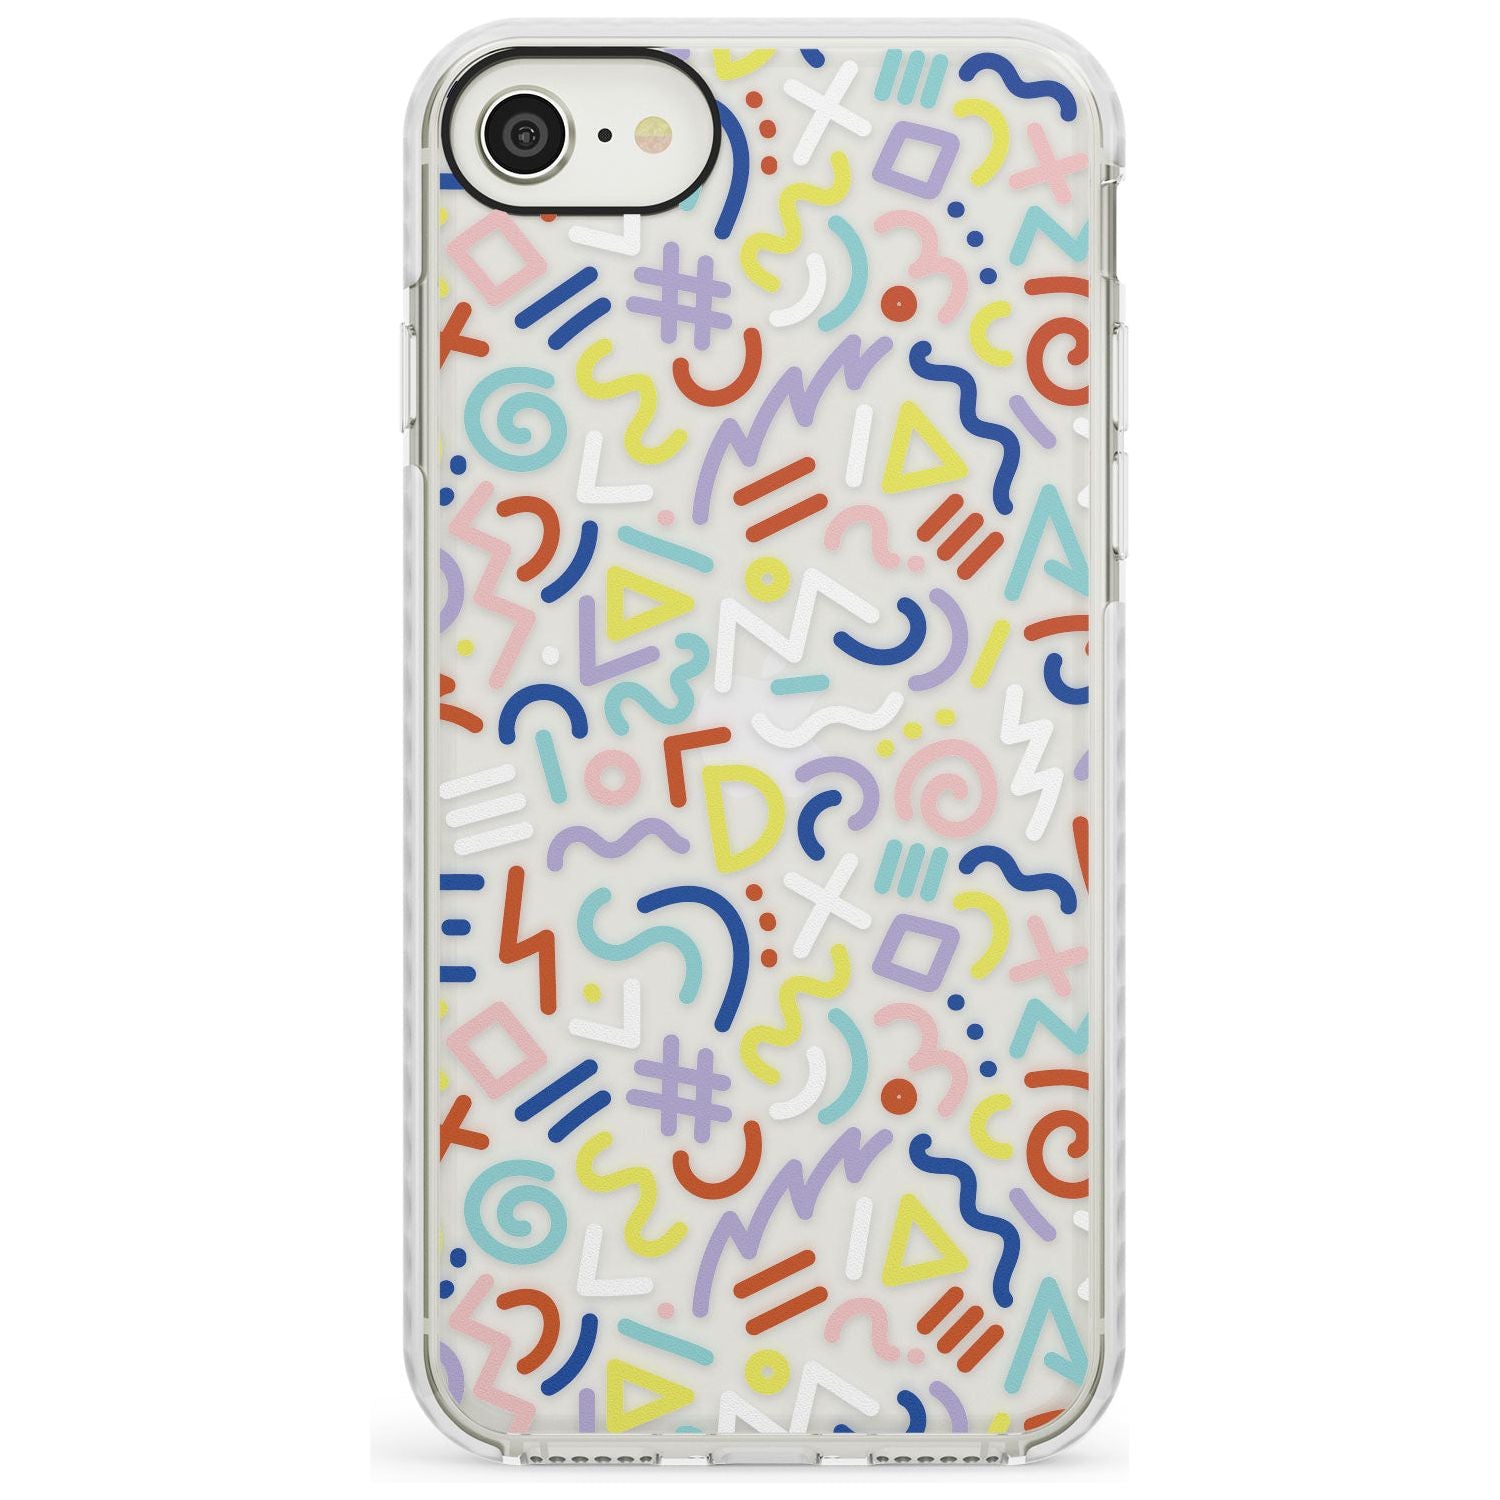 Colourful Mixed Shapes Retro Pattern Design Impact Phone Case for iPhone SE 8 7 Plus